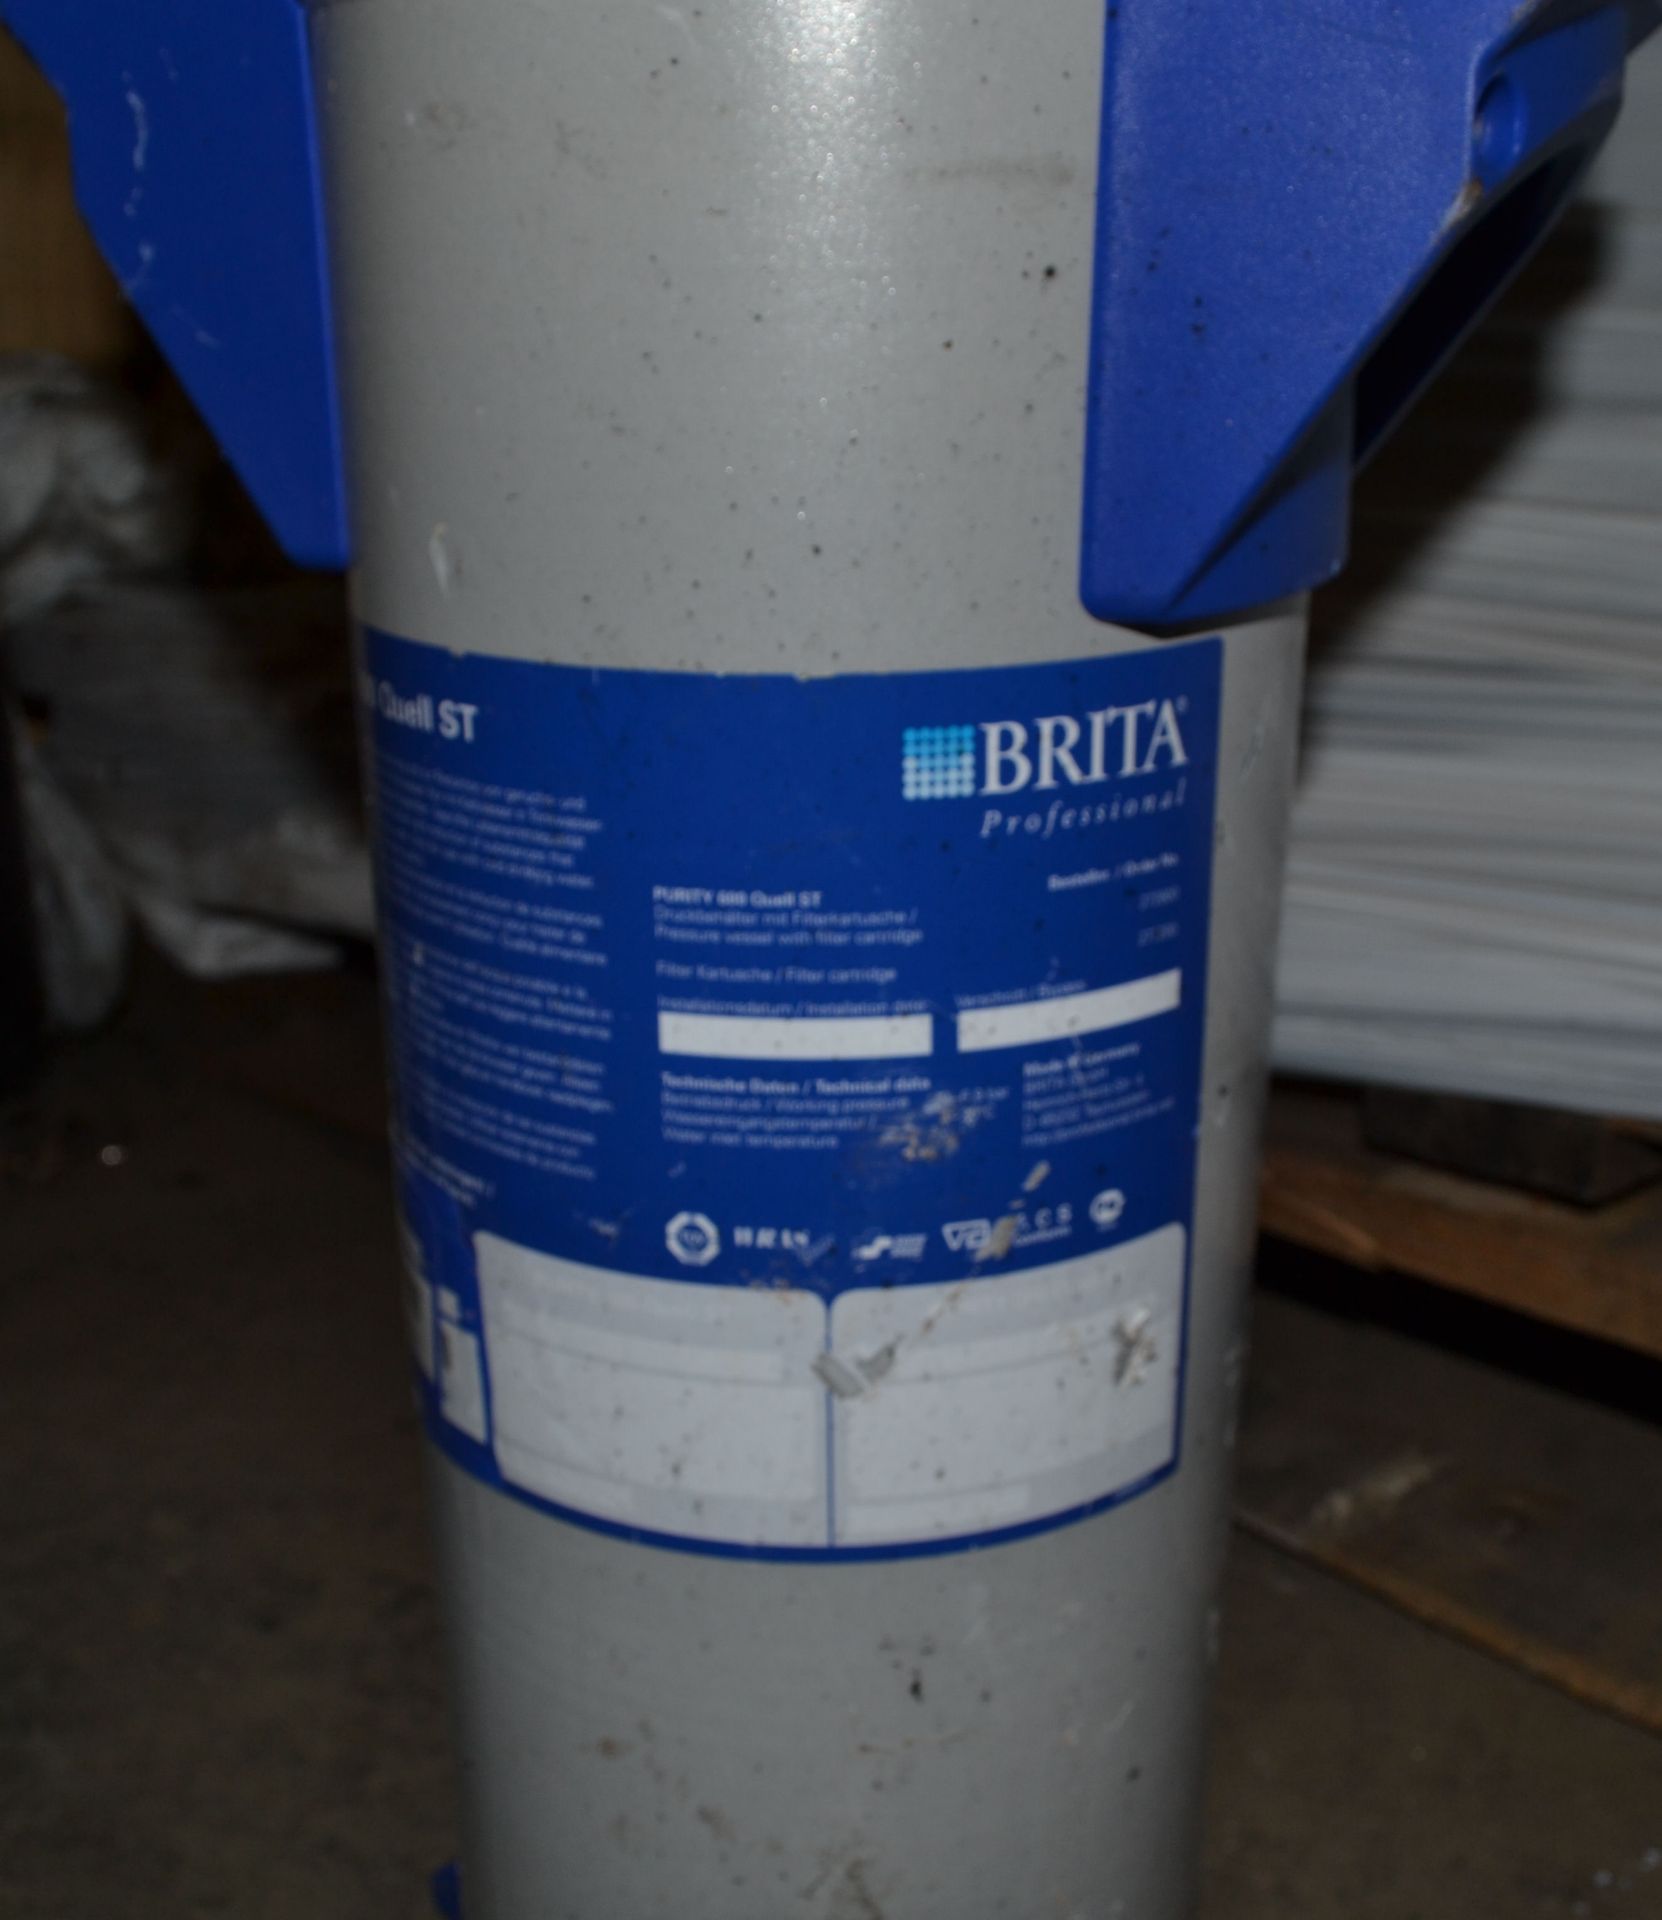 1 x Brita Professional Purity 600 Quell ST Filter - Ref: FJC007 - CL124 - Location: Bolton BL1 - - Image 7 of 7